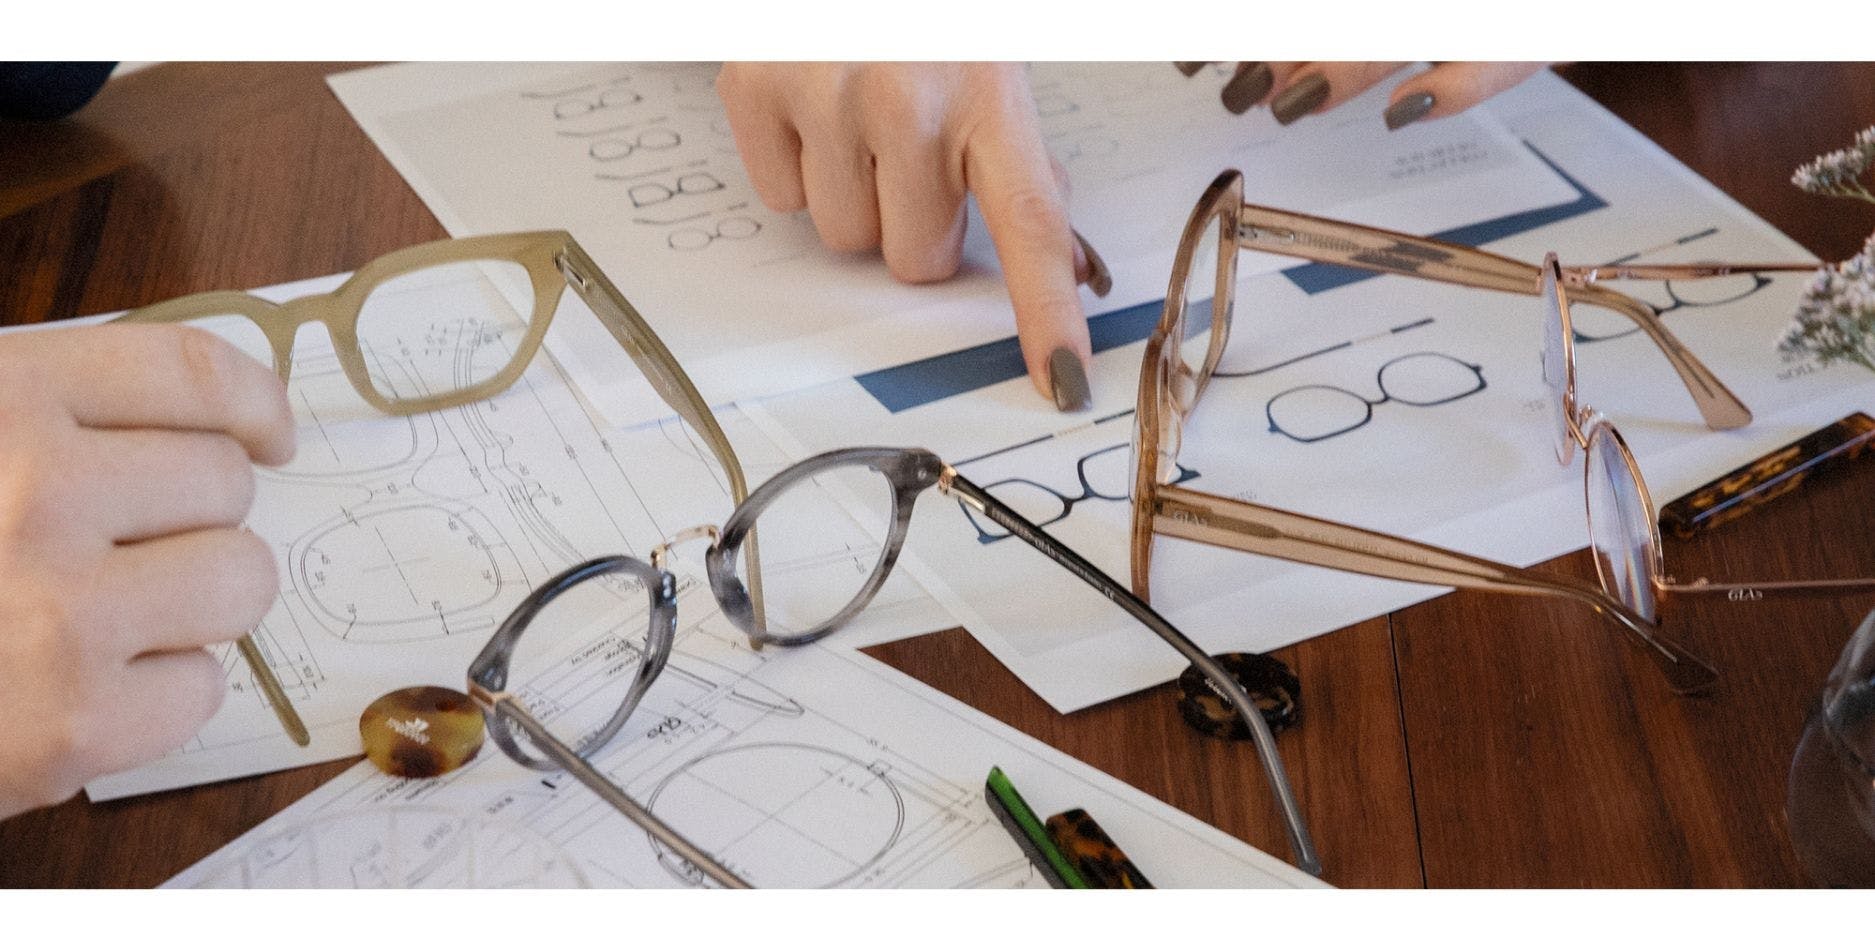 Reading glasses lying on a table with technical drawings and acetate samples